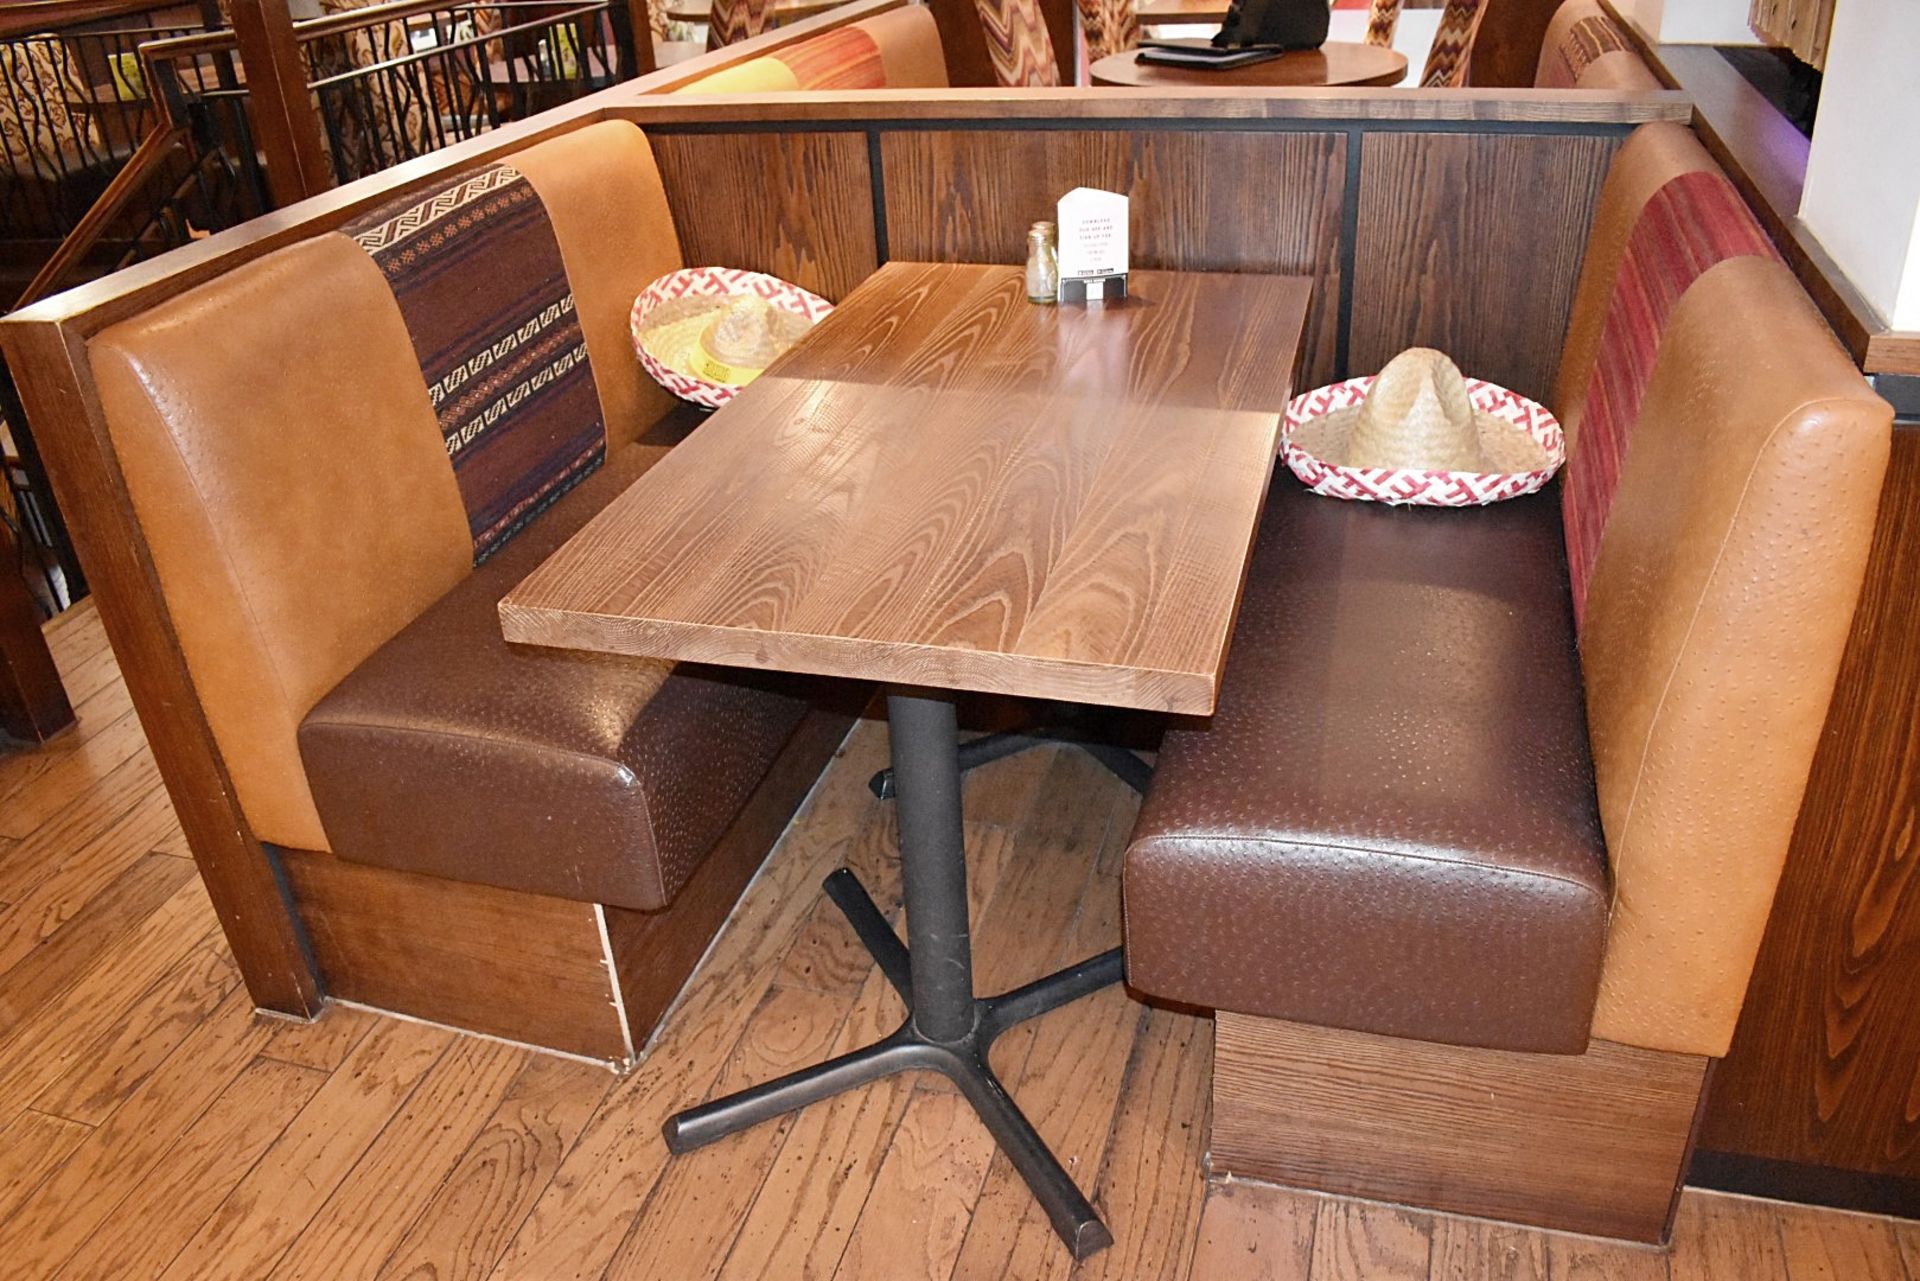 15-Pieces Of Restaurant Booth Seating Of Varying Length - Image 15 of 22